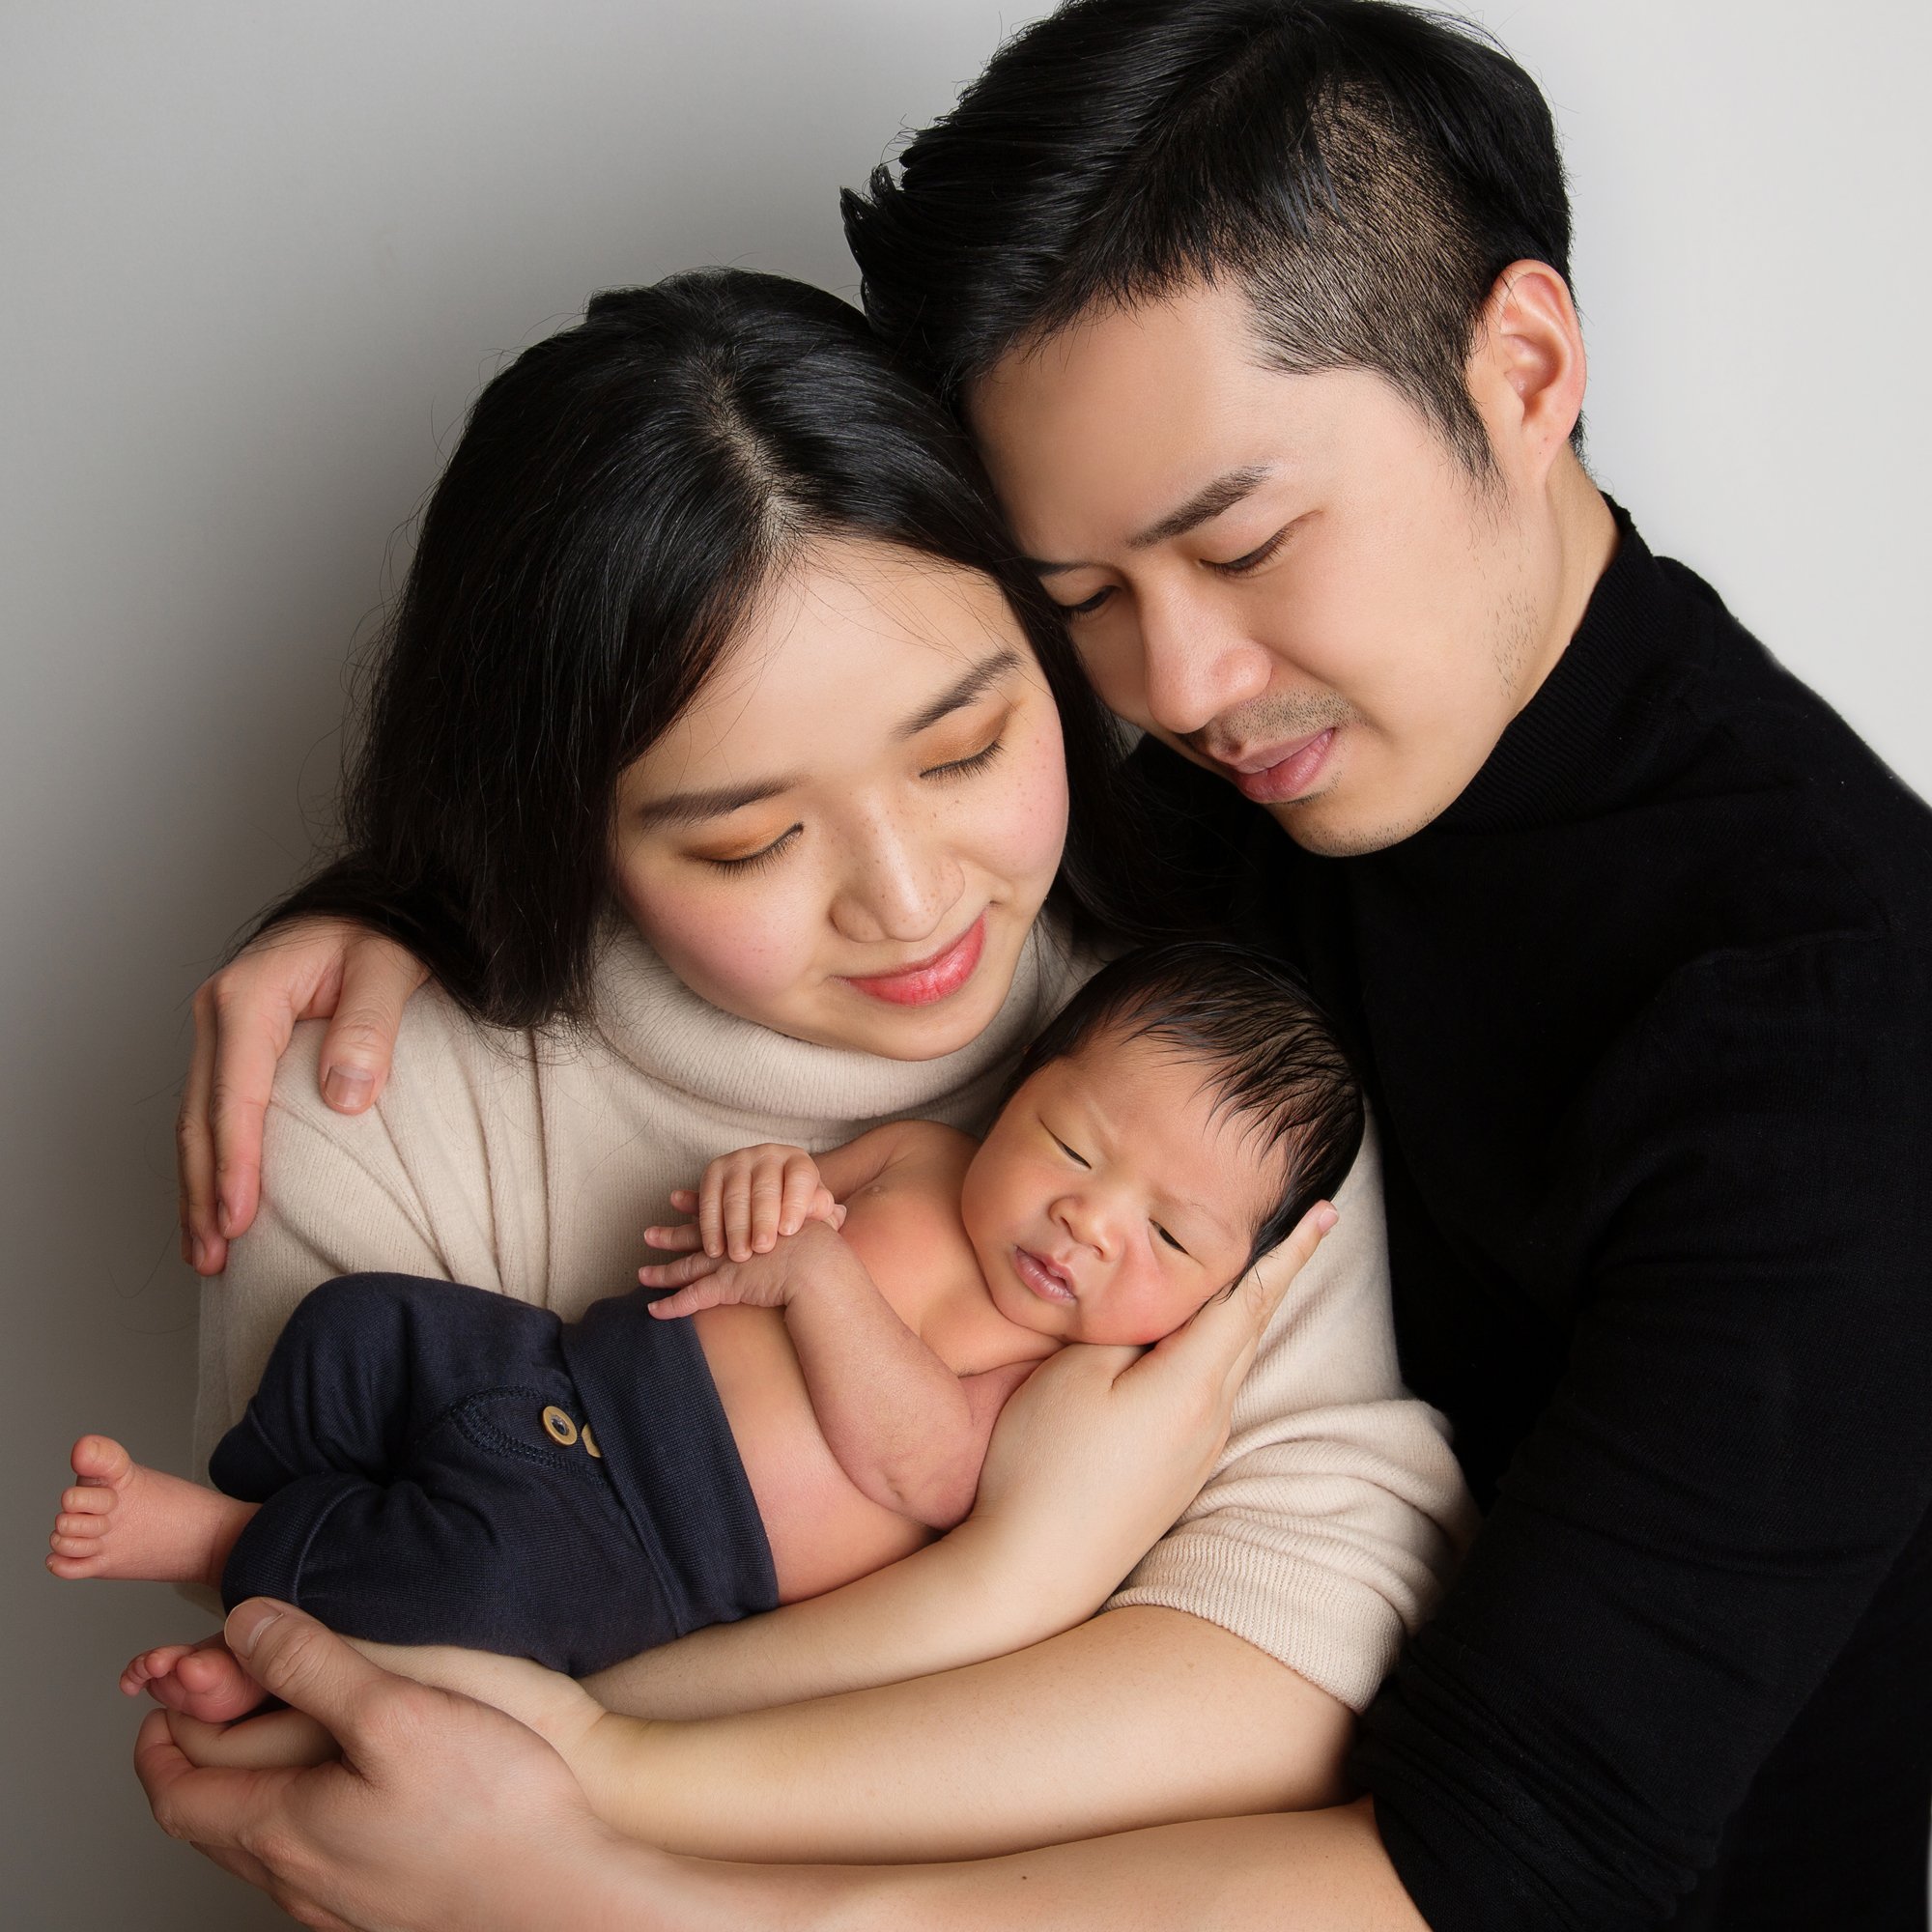 Newborn photographer who comes to your home in Sloane Square